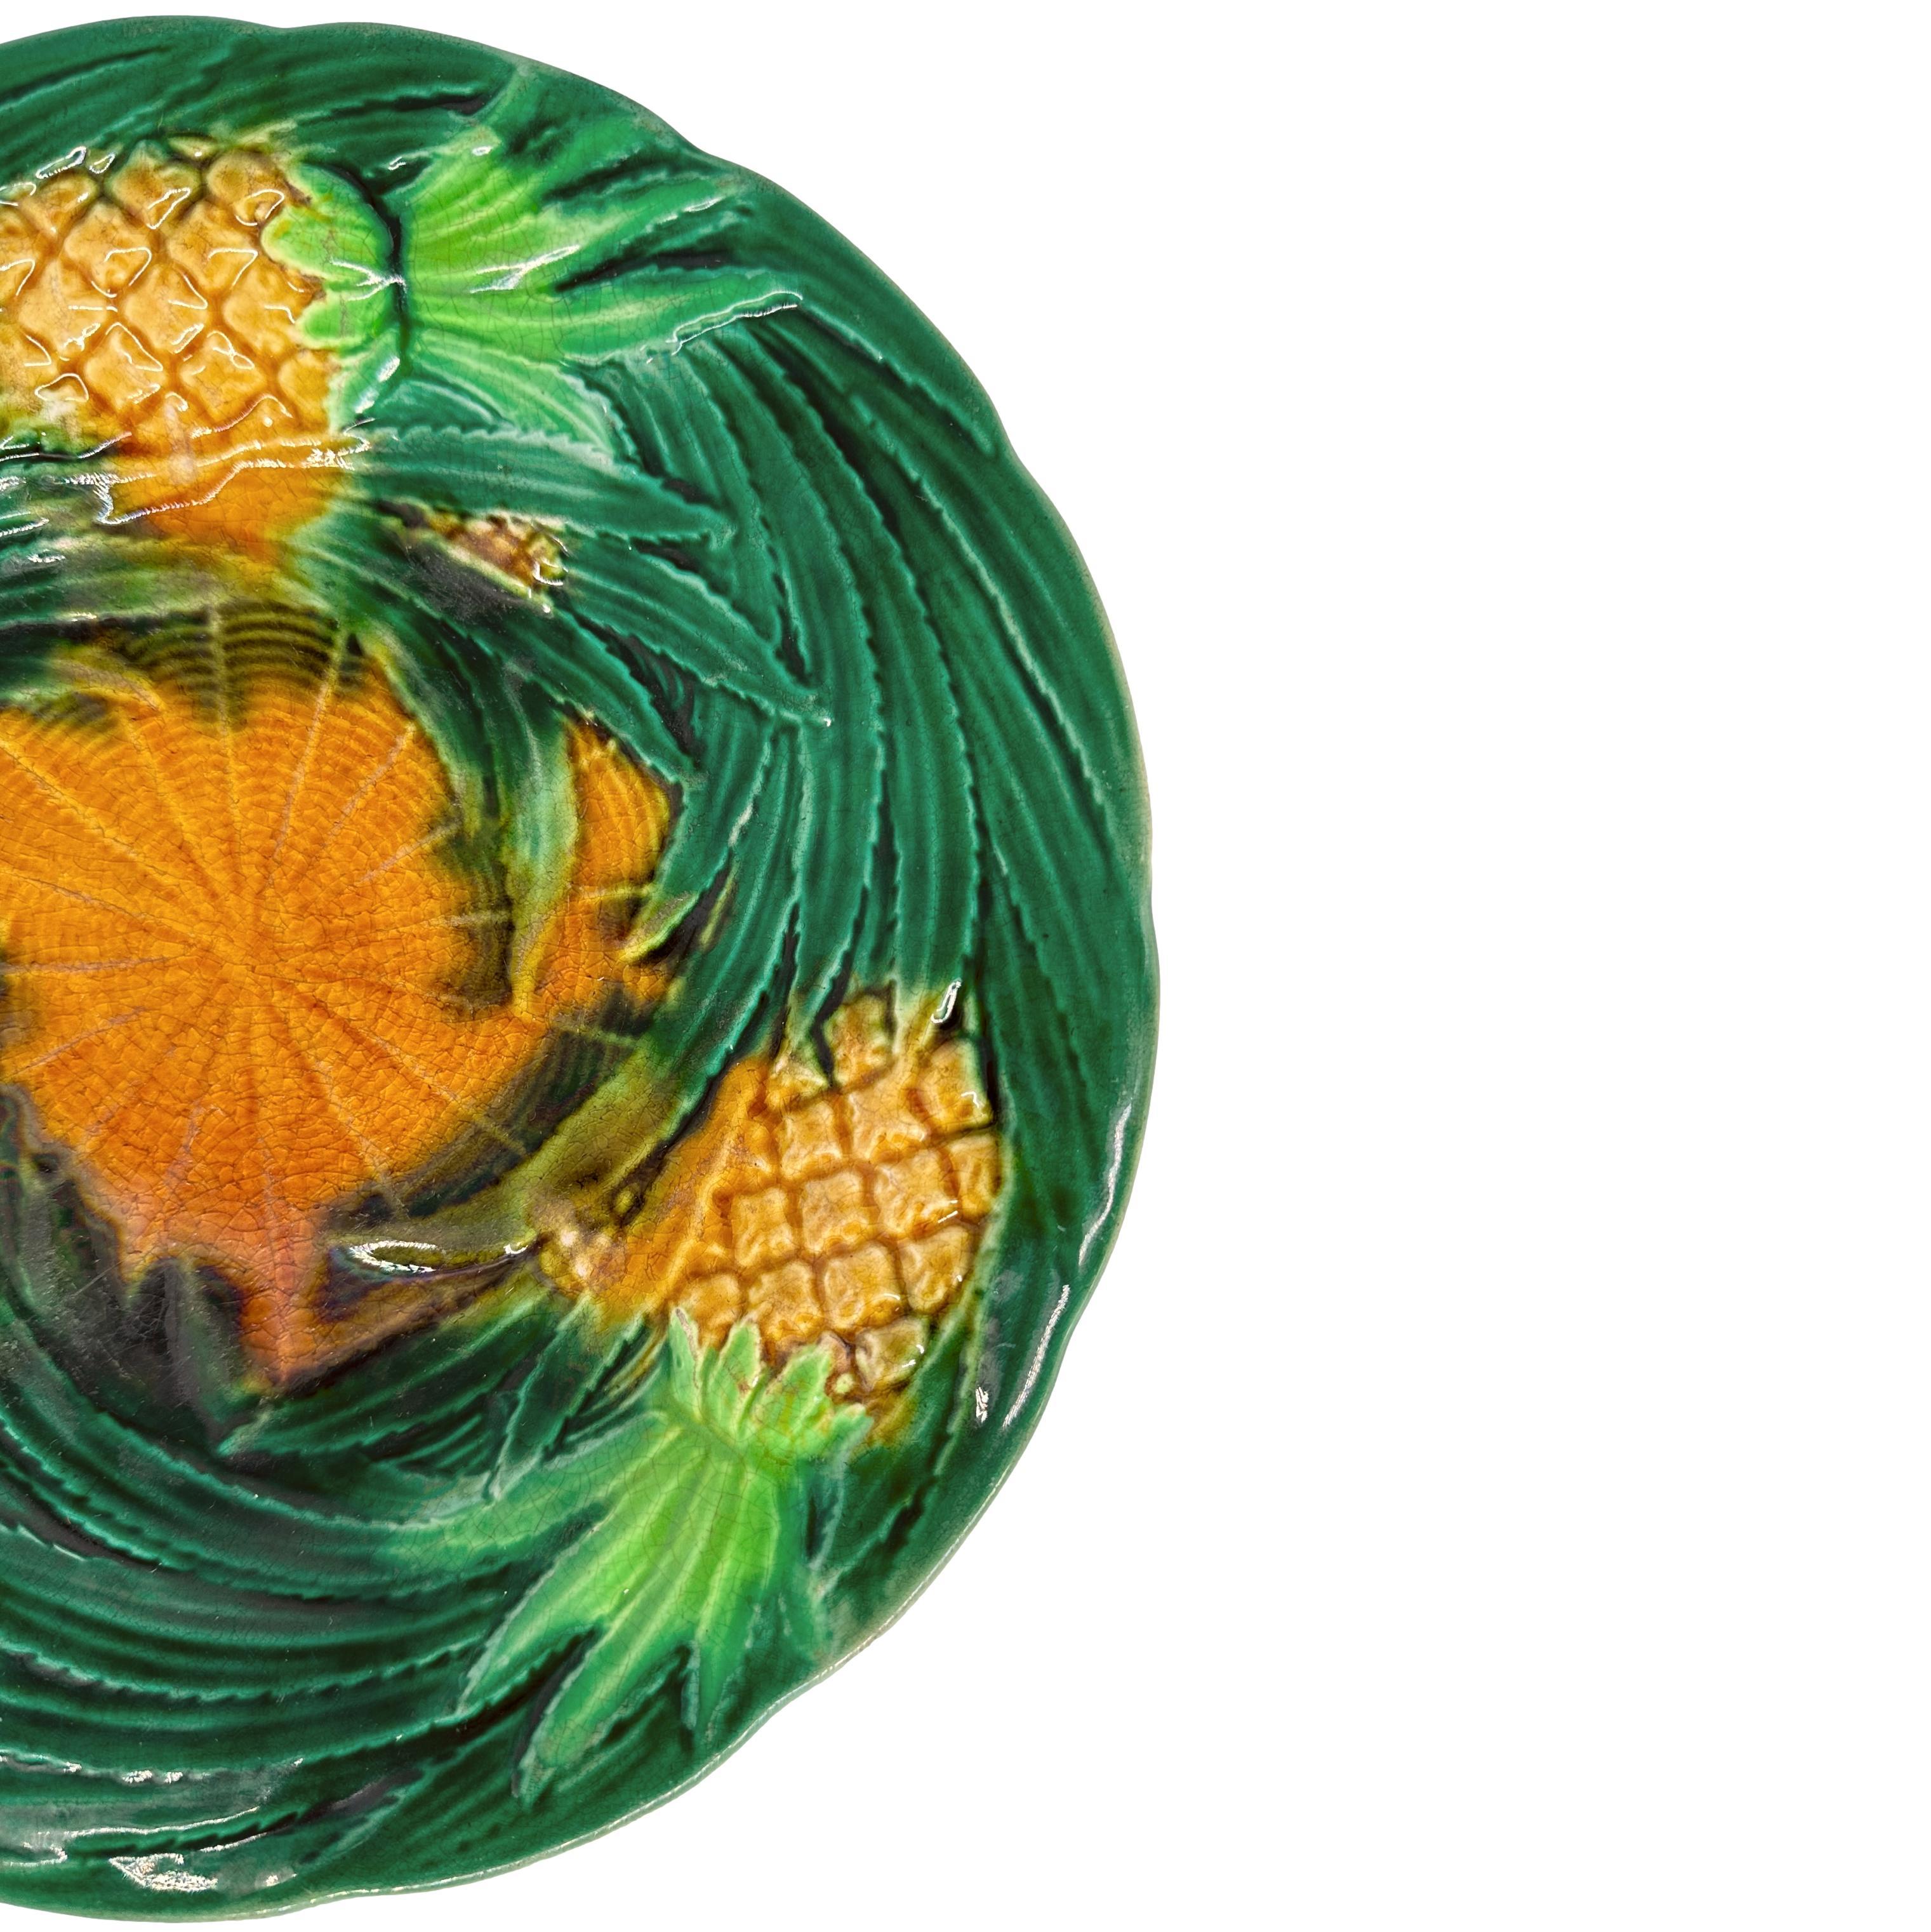 Victorian A George Jones Majolica Pineapples on Basketweave Plate, English, ca. 1863 For Sale